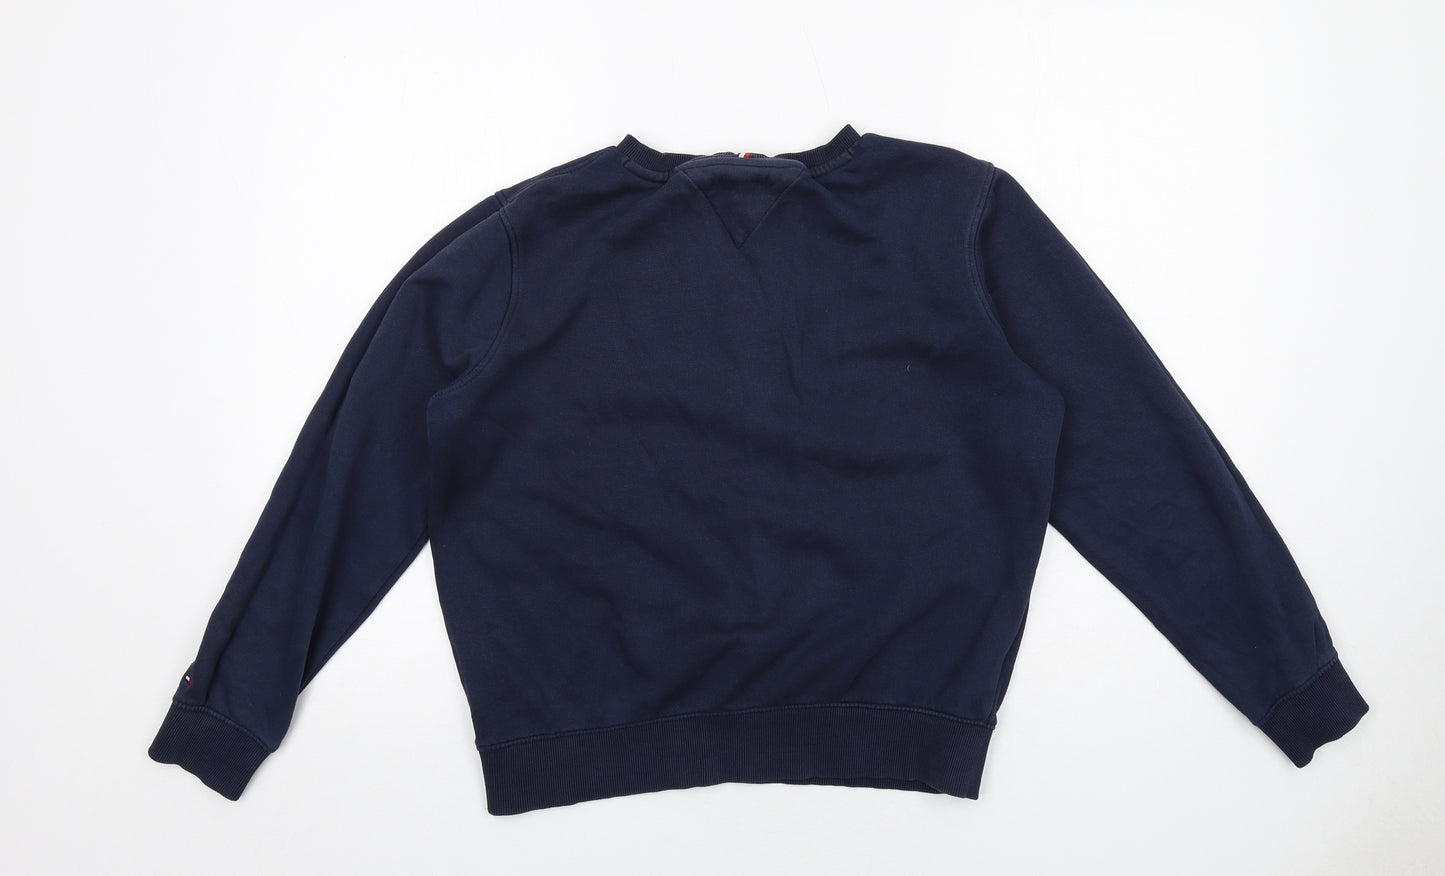 Tommy Hilfiger Boys Blue Cotton Pullover Sweatshirt Size 12-13 Years Pullover